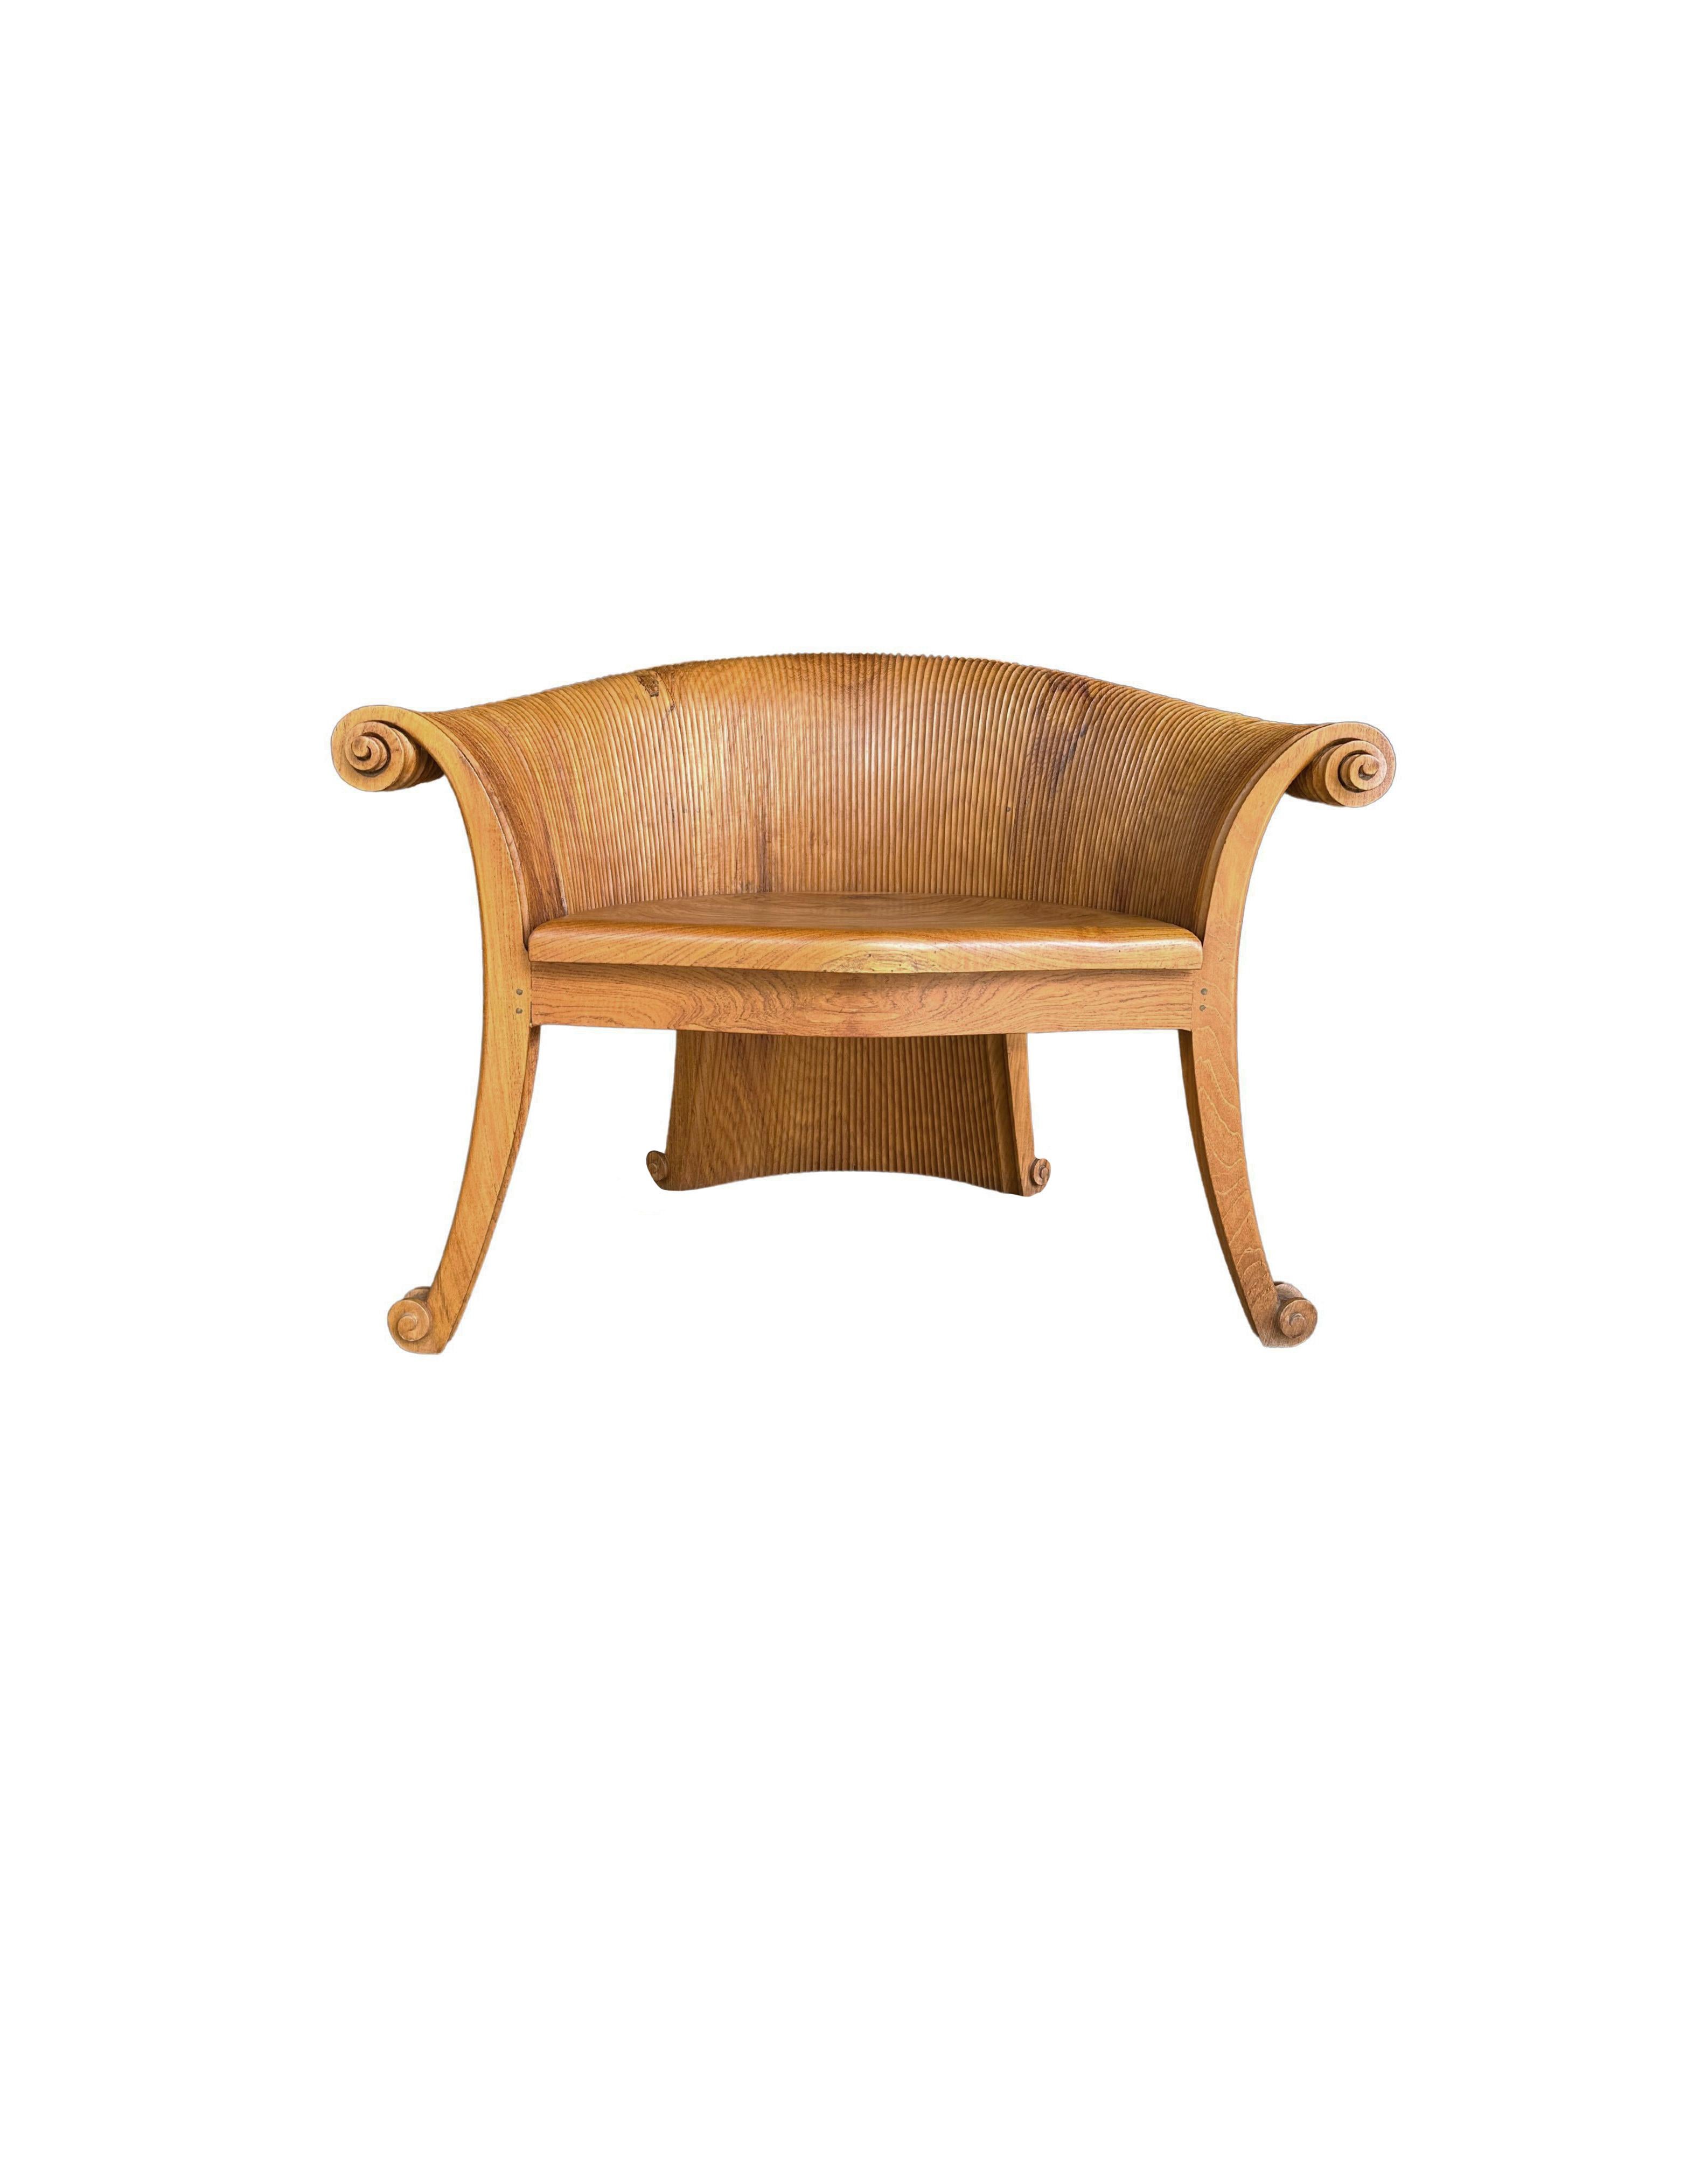 A wonderfully sculptural teak wood chair featuring intricately carved curves and ribbed detailing. Resembling a curved lotus leaf it features a strong organic form. The mix of wood textures and shades adds to its charm. A unique piece of